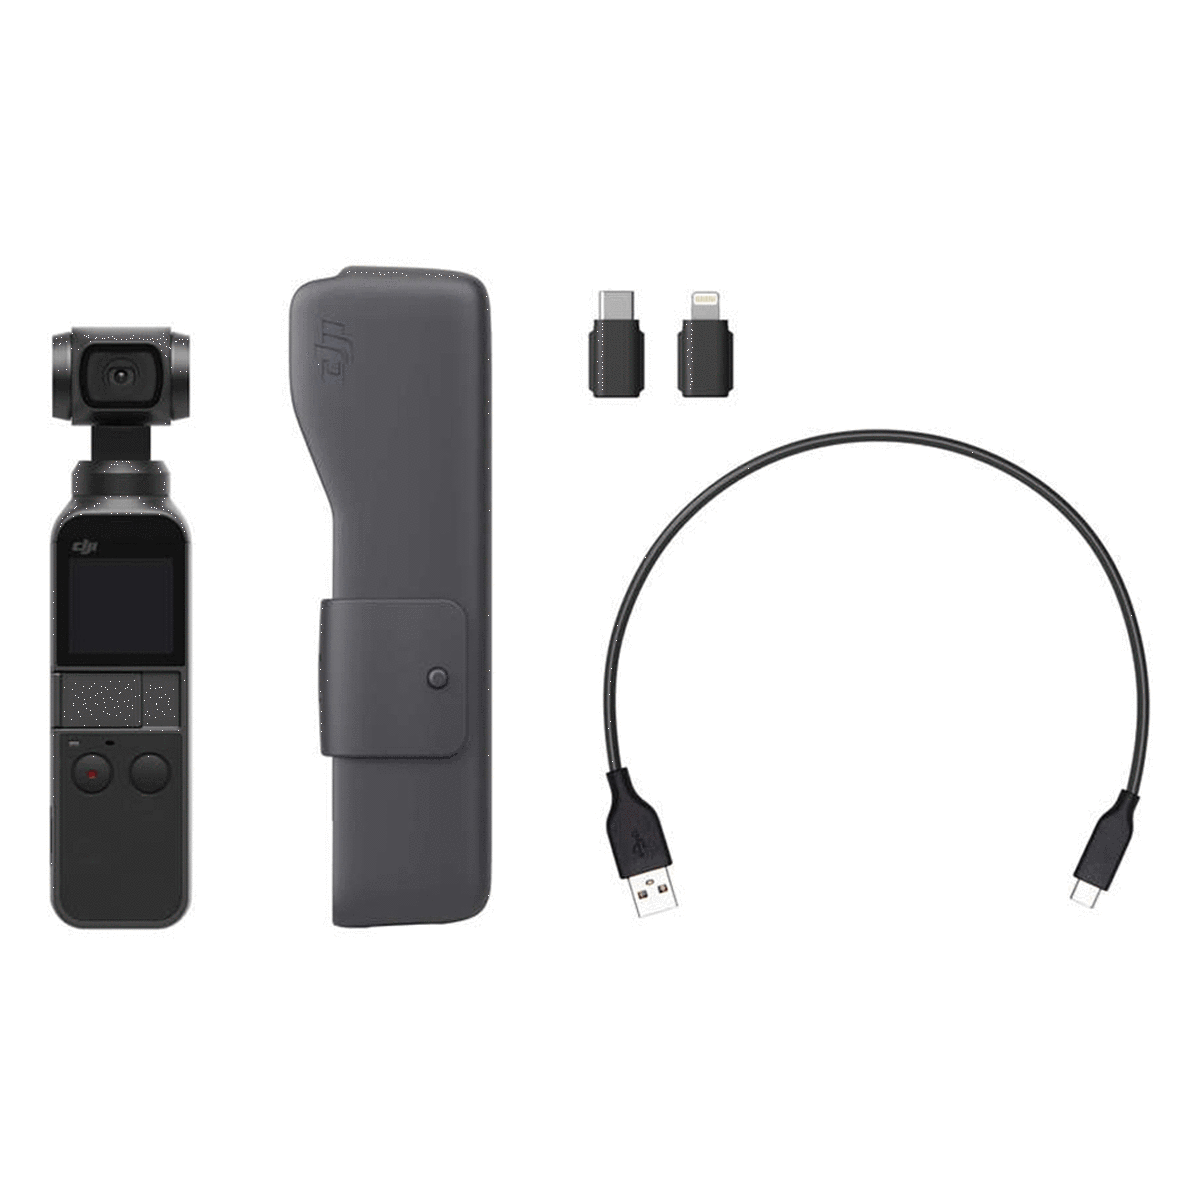 DJI Osmo Pocket 4K 60FPS 3-Axis Portable Stabilized Handheld Gimbal